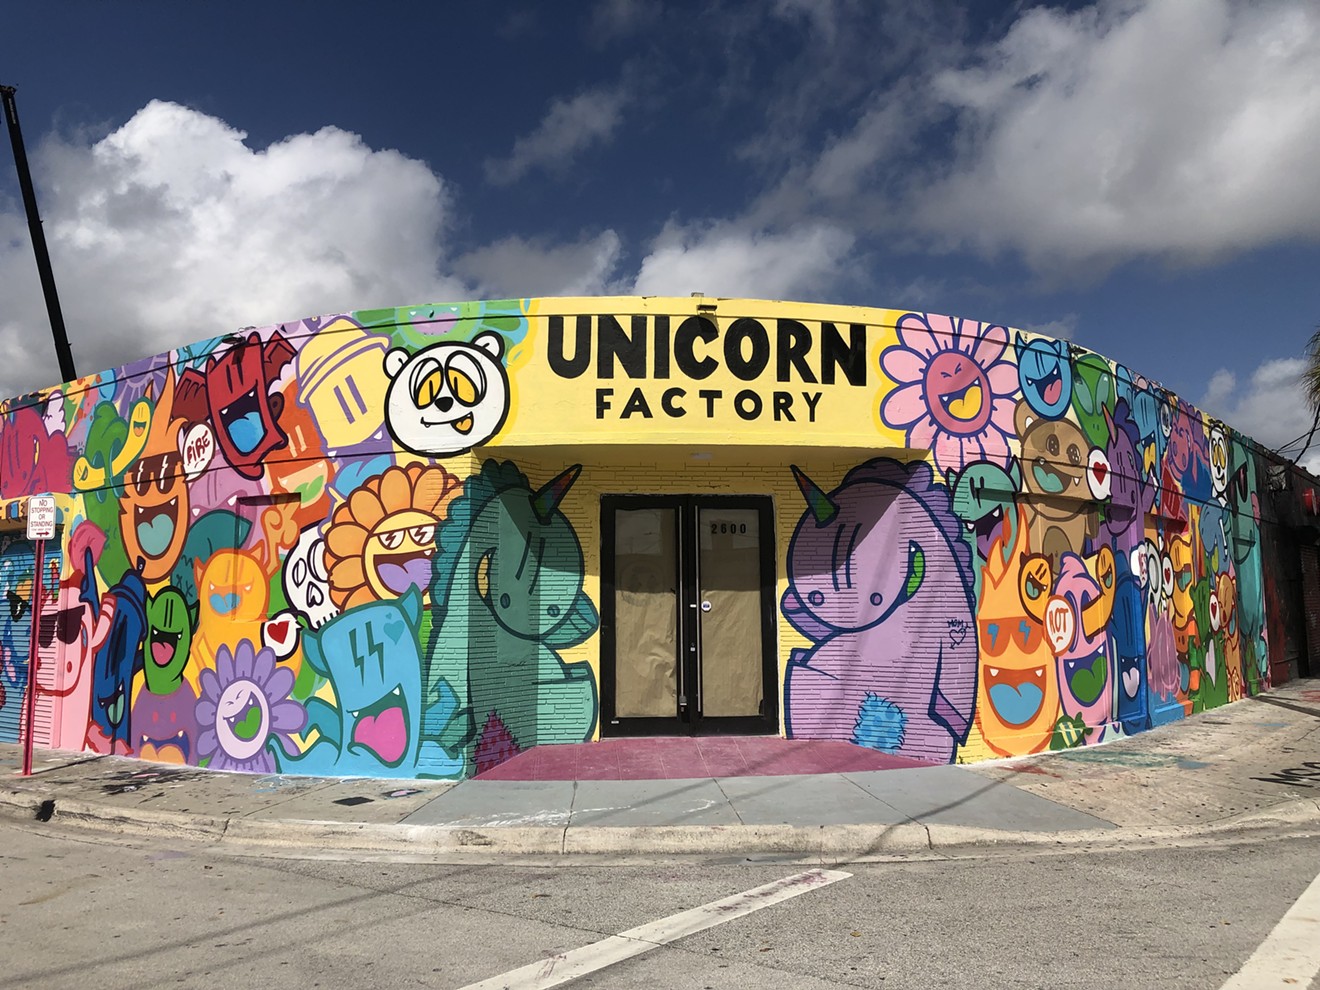 The exterior of the almost-open Unicorn Factory.